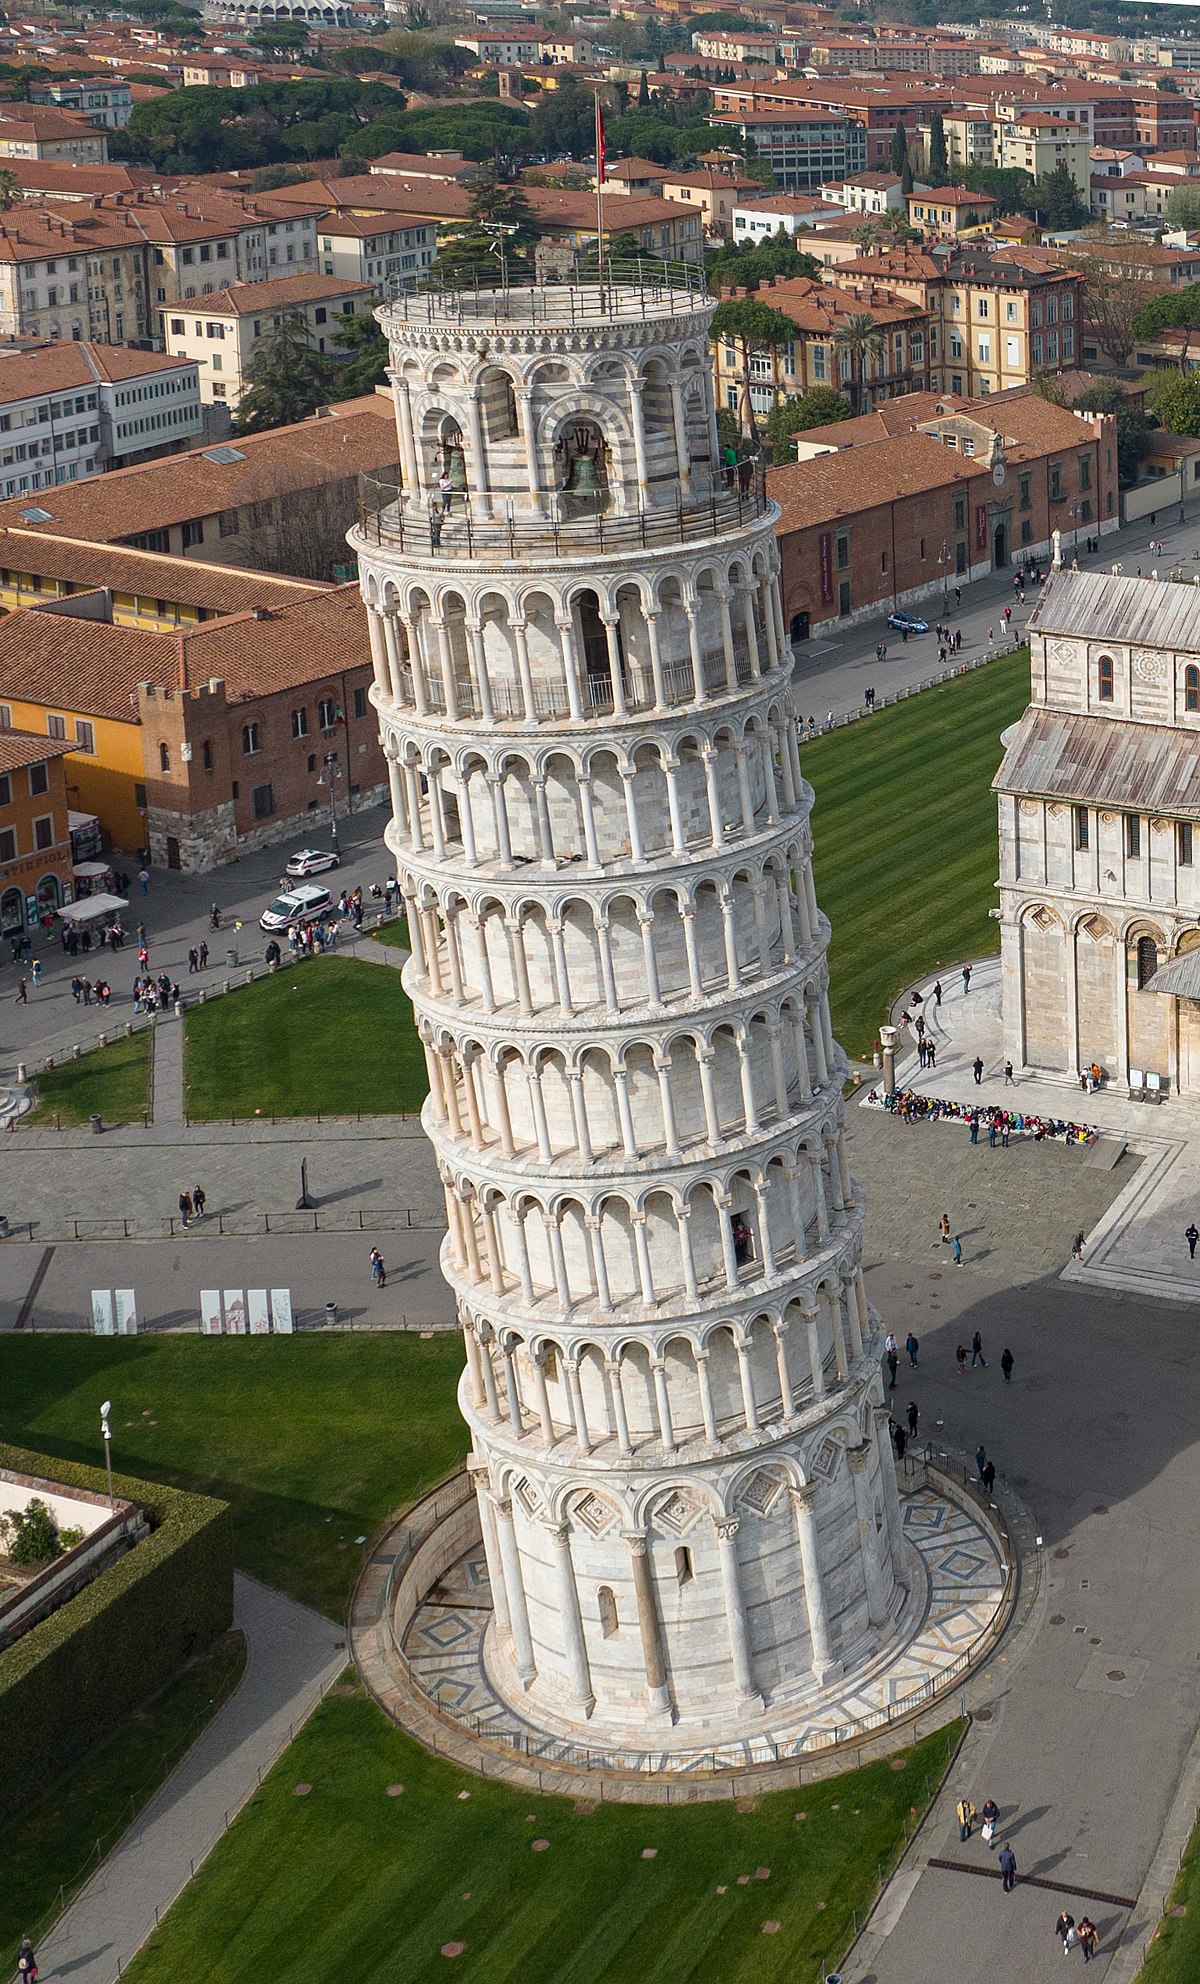 Leaning Tower Of Pisa - Wikipedia